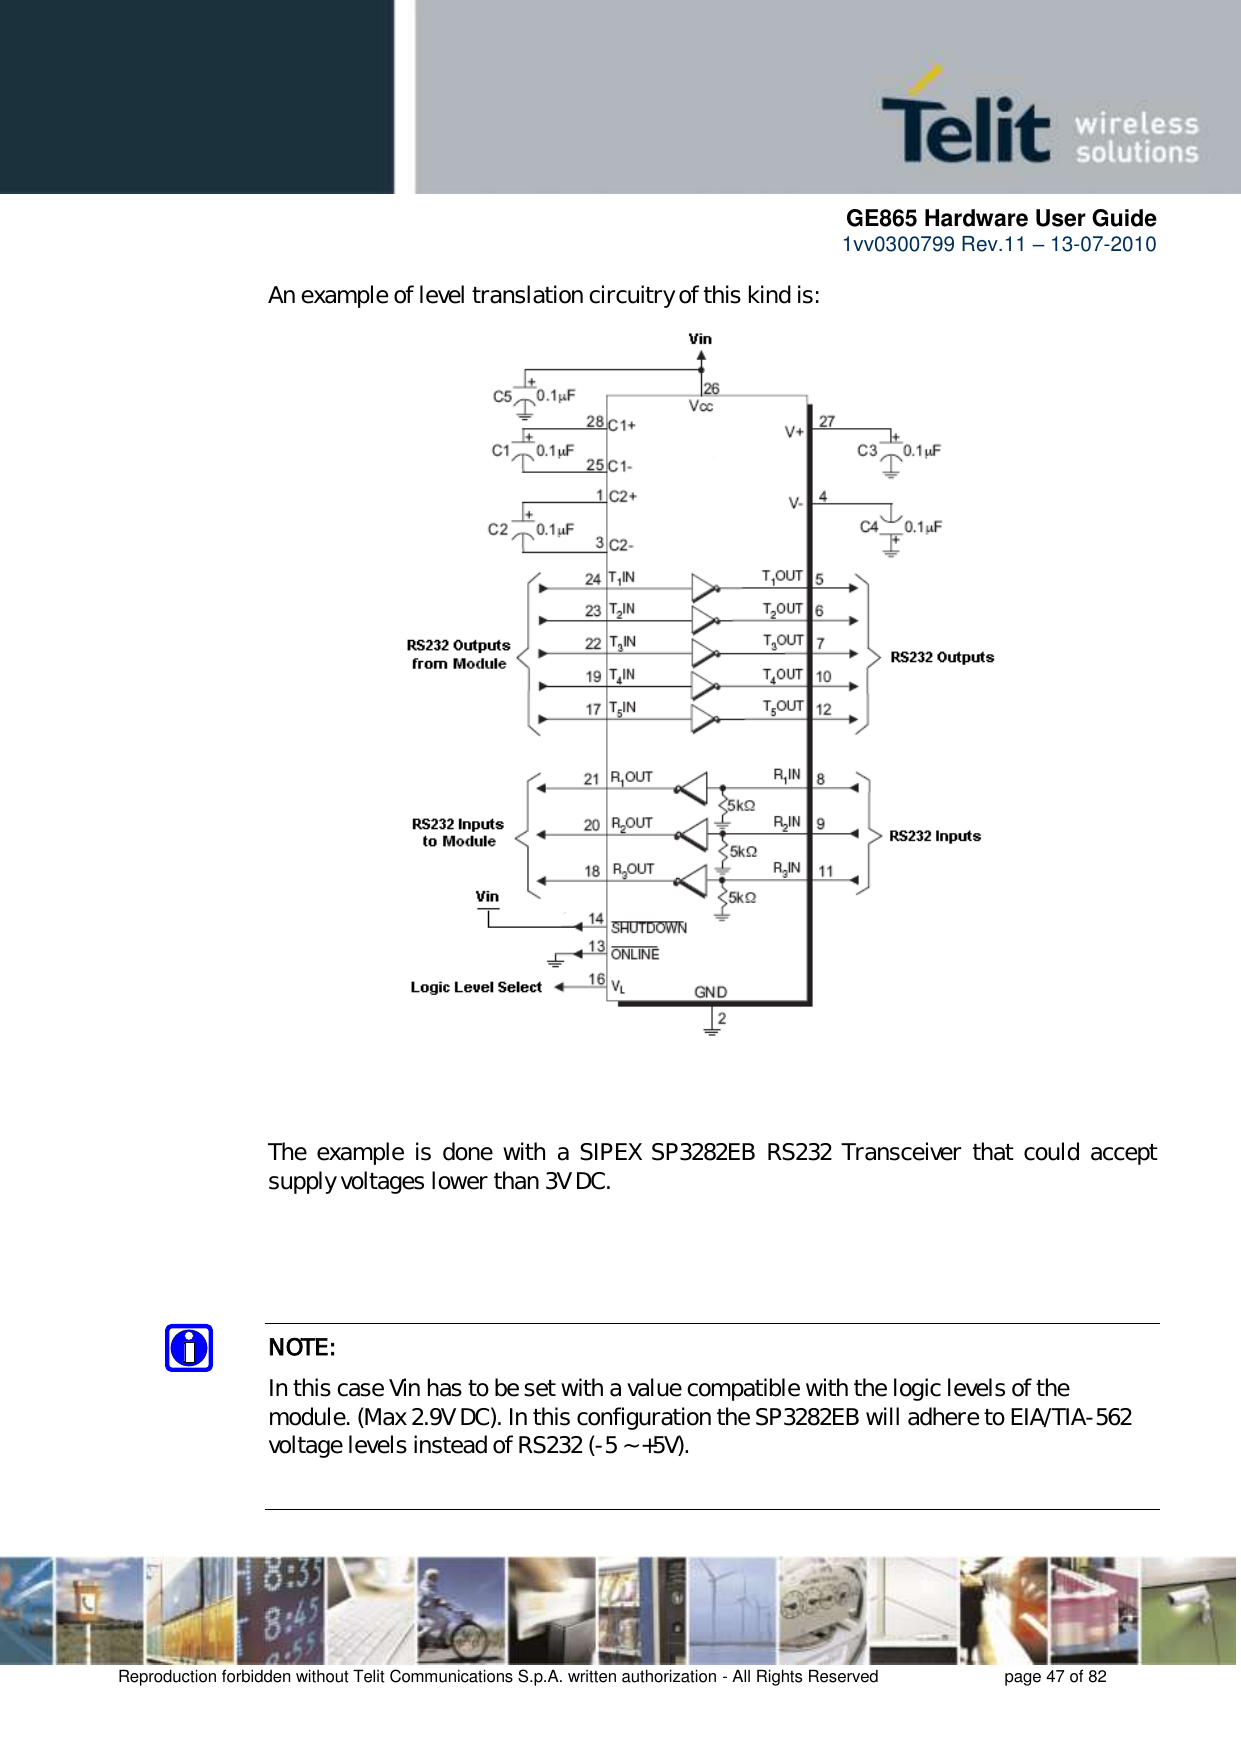      GE865 Hardware User Guide 1vv0300799 Rev.11 – 13-07-2010       Reproduction forbidden without Telit Communications S.p.A. written authorization - All Rights Reserved    page 47 of 82  An example of level translation circuitry of this kind is:                              The  example  is  done  with  a SIPEX  SP3282EB  RS232  Transceiver  that  could  accept supply voltages lower than 3V DC.     NOTE: In this case Vin has to be set with a value compatible with the logic levels of the module. (Max 2.9V DC). In this configuration the SP3282EB will adhere to EIA/TIA-562 voltage levels instead of RS232 (-5 ~ +5V).  